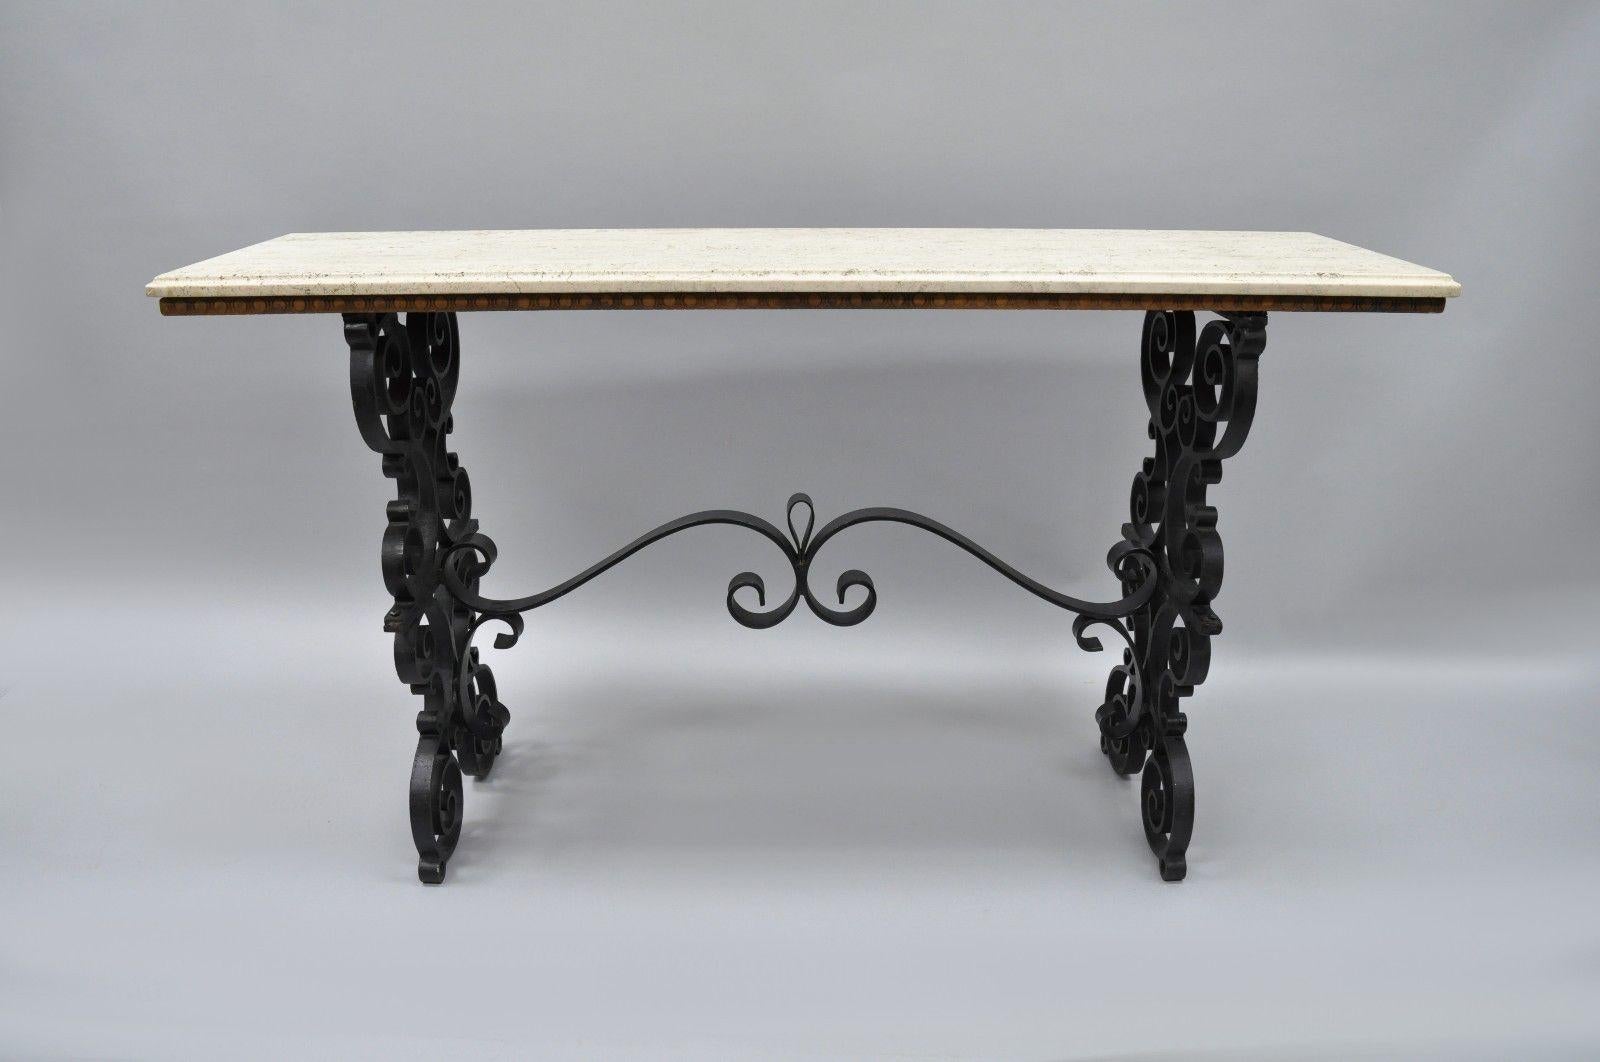 Gothic scrolling wrought iron console table. Item features travertine stone top, fancy scrolling wrought iron base, ornate stretcher base, wooden support to stone top, great Gothic form and quality, circa early to mid-20th century. Measurements: 30